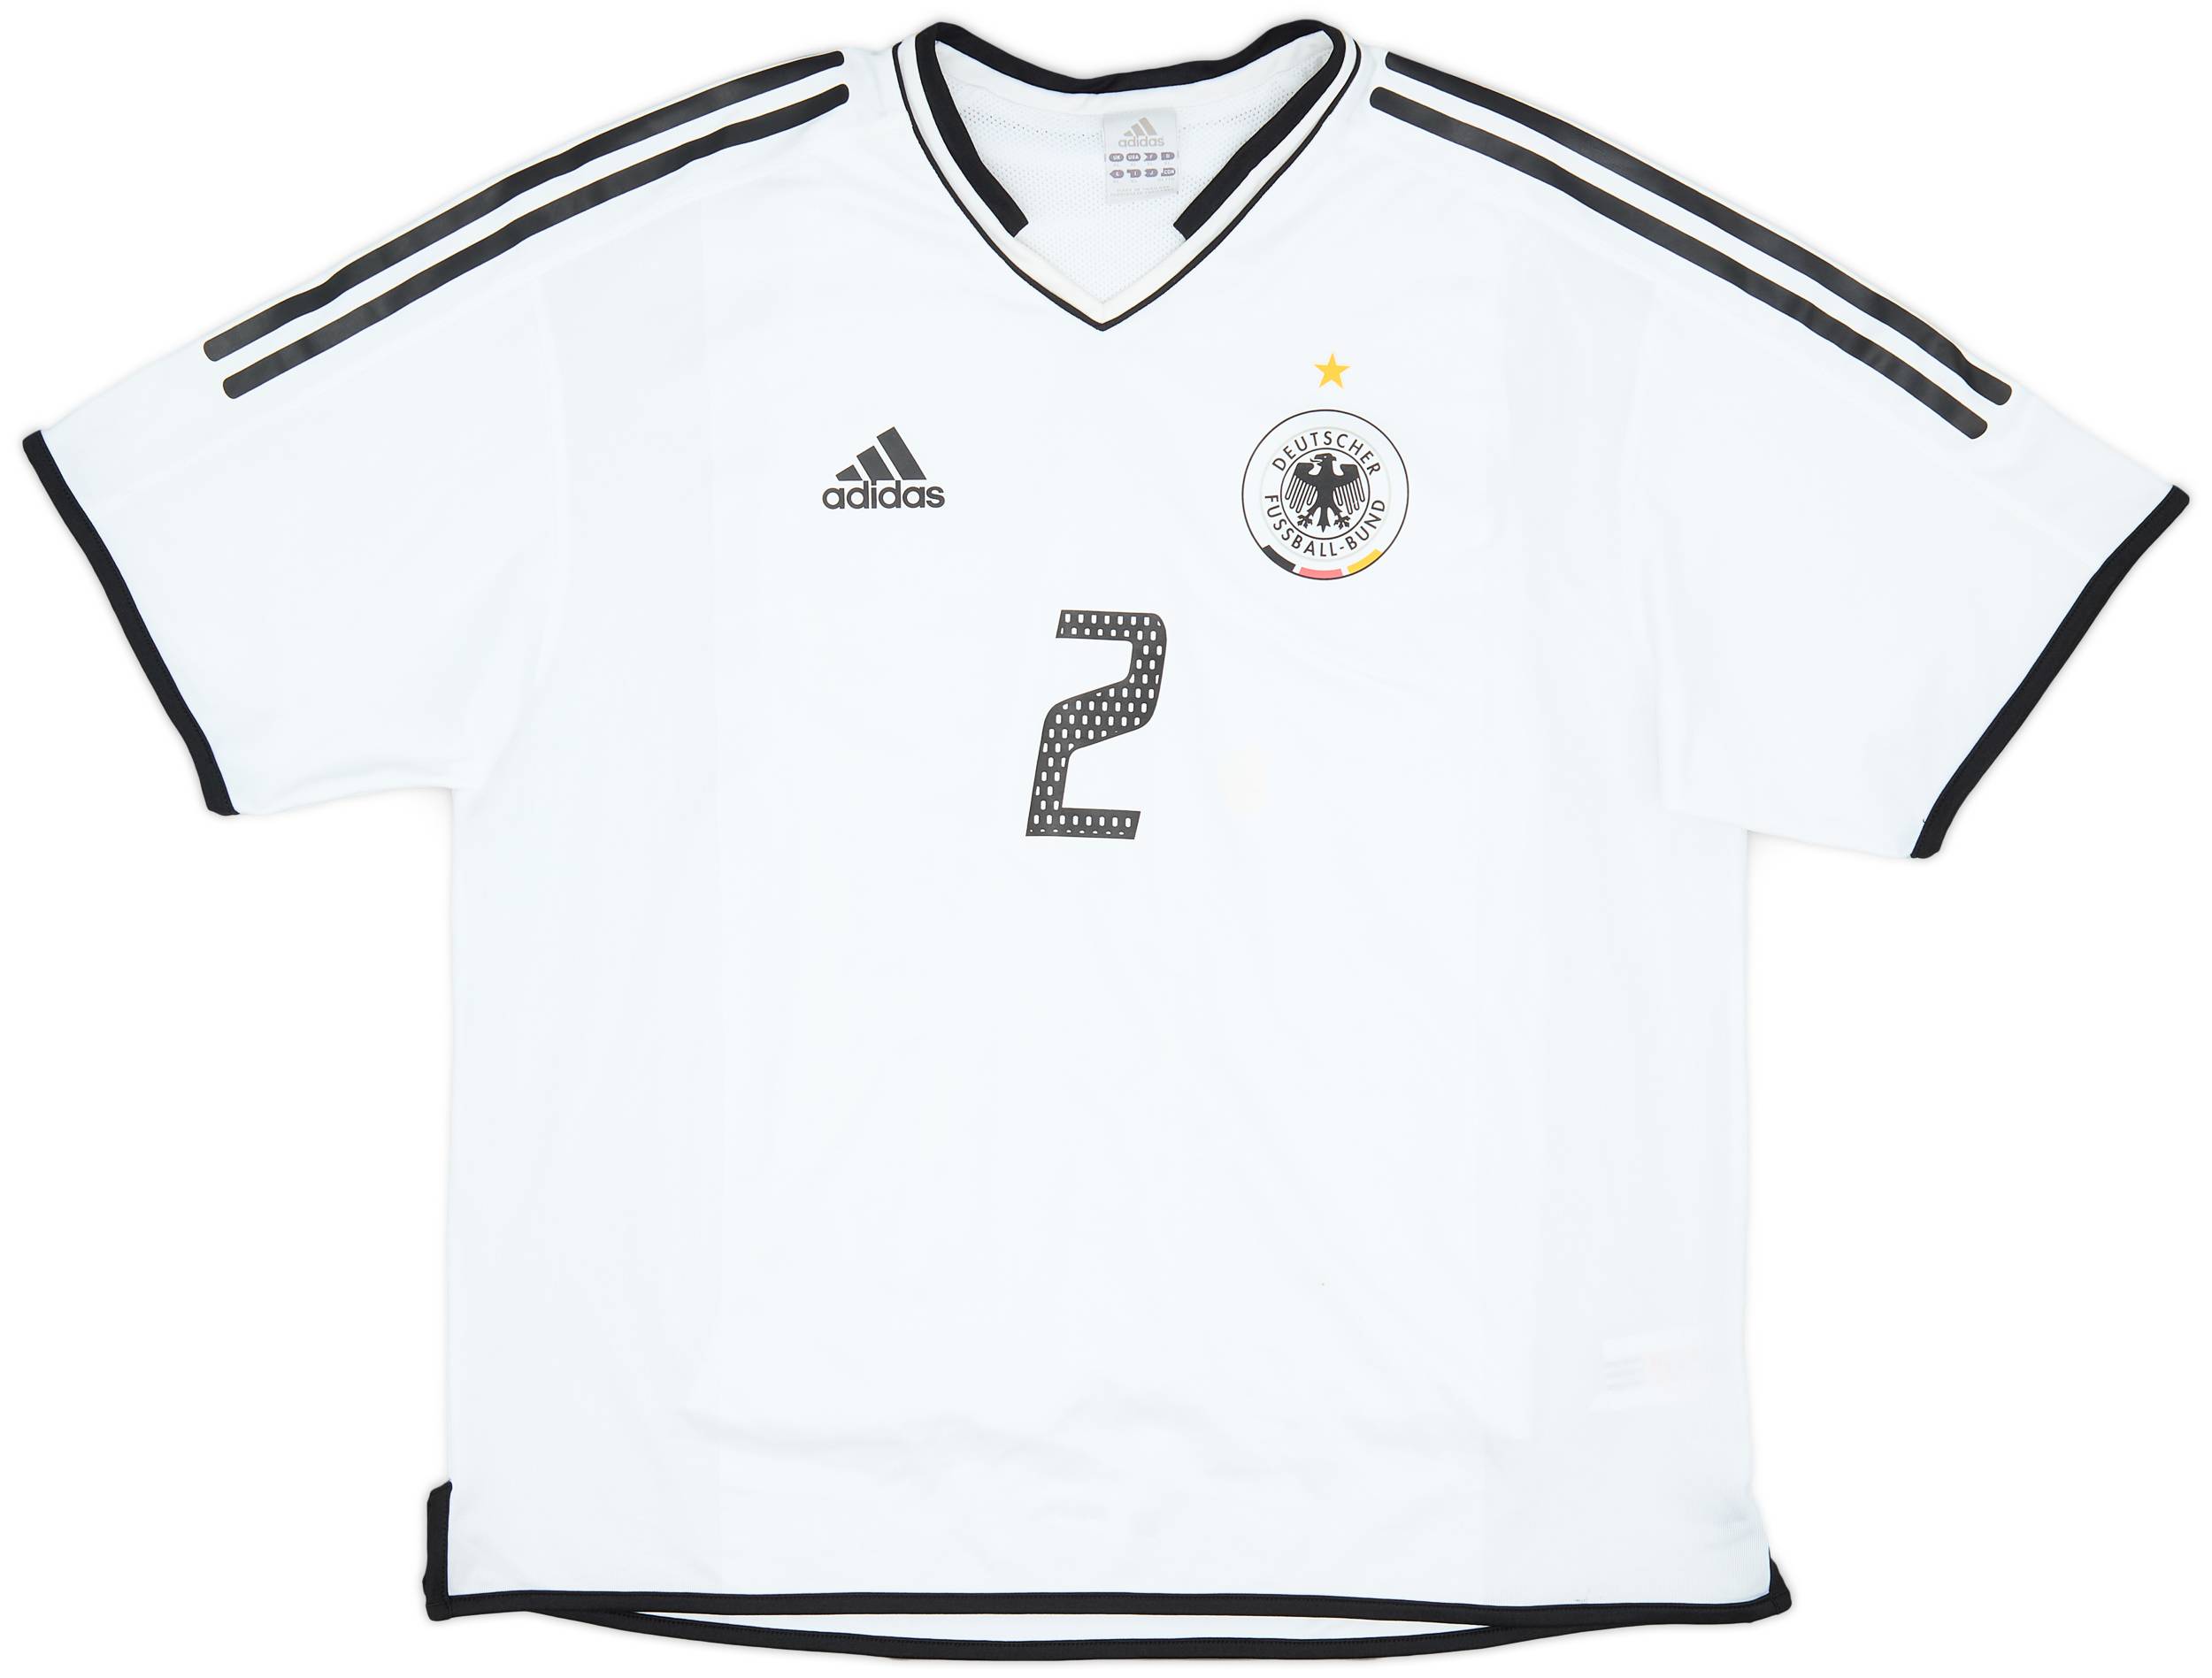 2004-05 Germany Women's Player Issue Home Shirt #2 - 7/10 - (Women's XL)